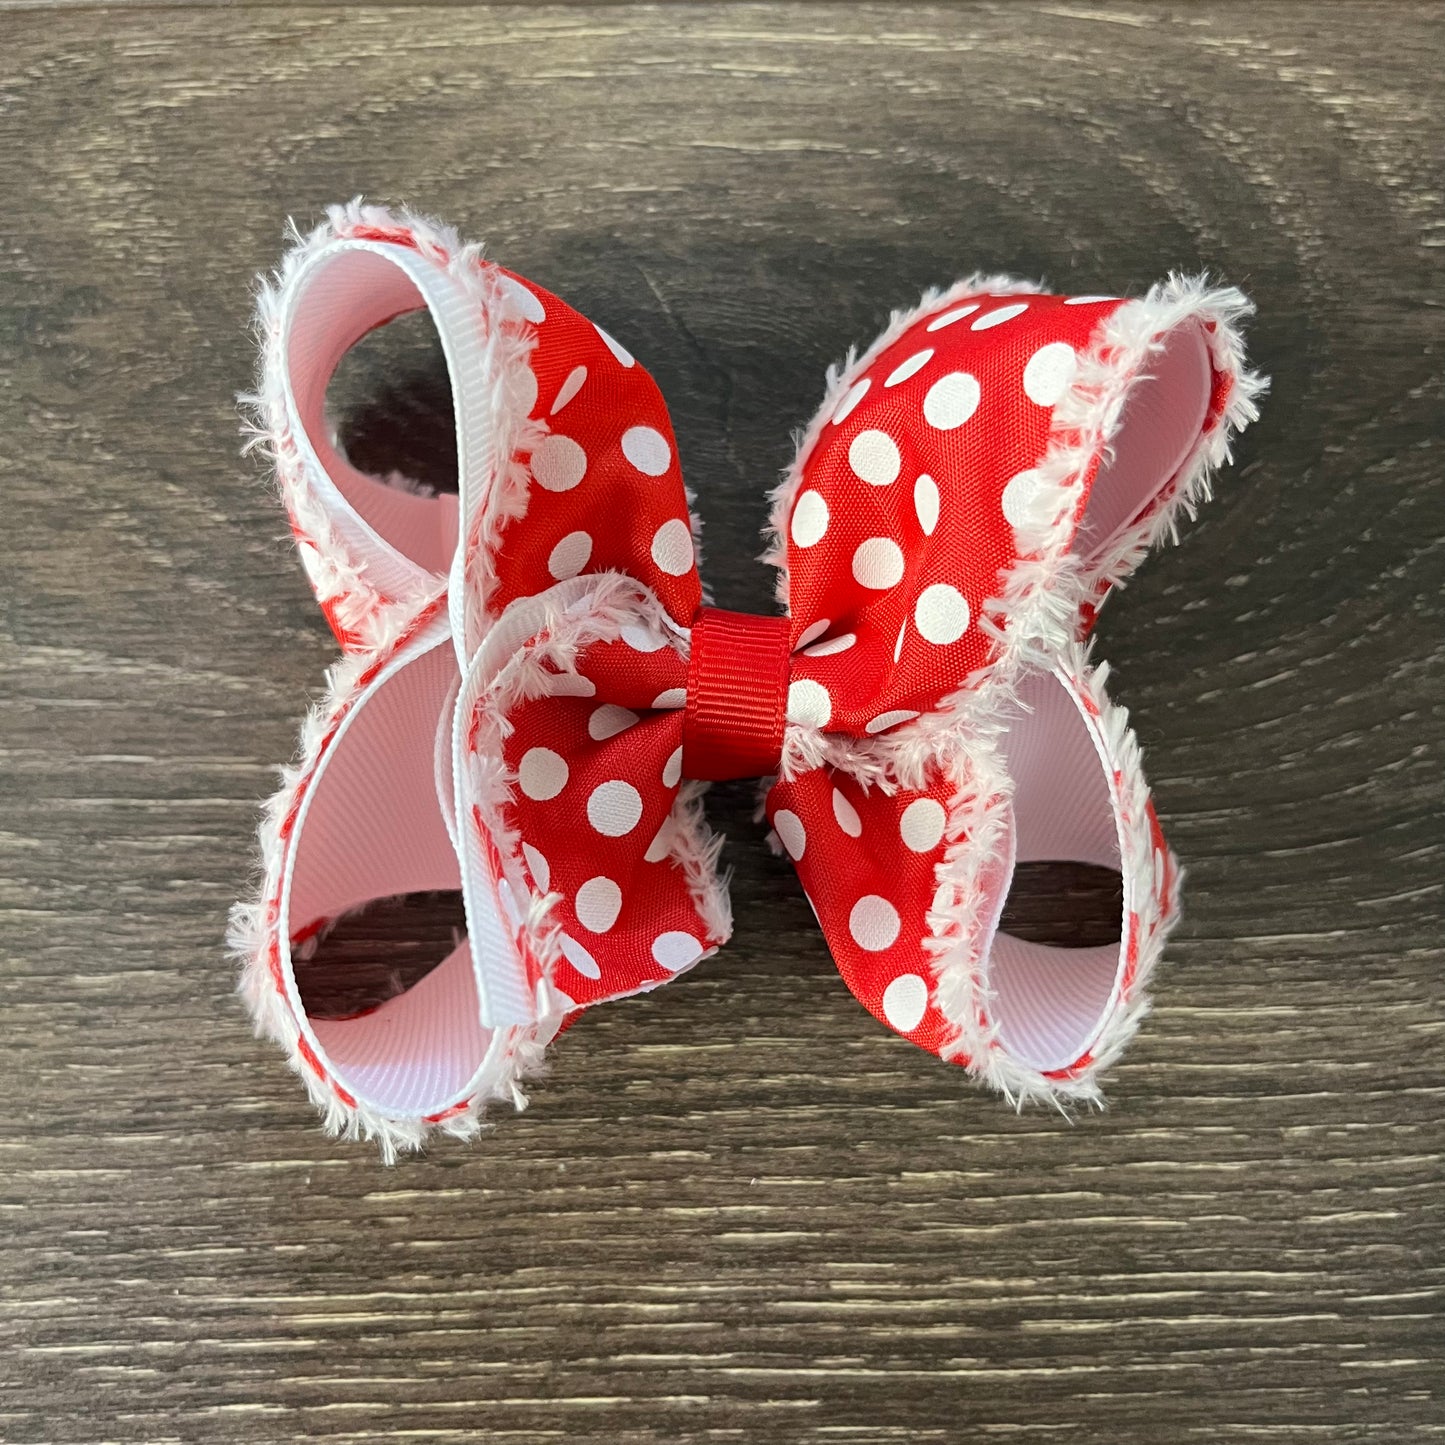 4" Boutique Bow - Layered - Red / White Polka Dots